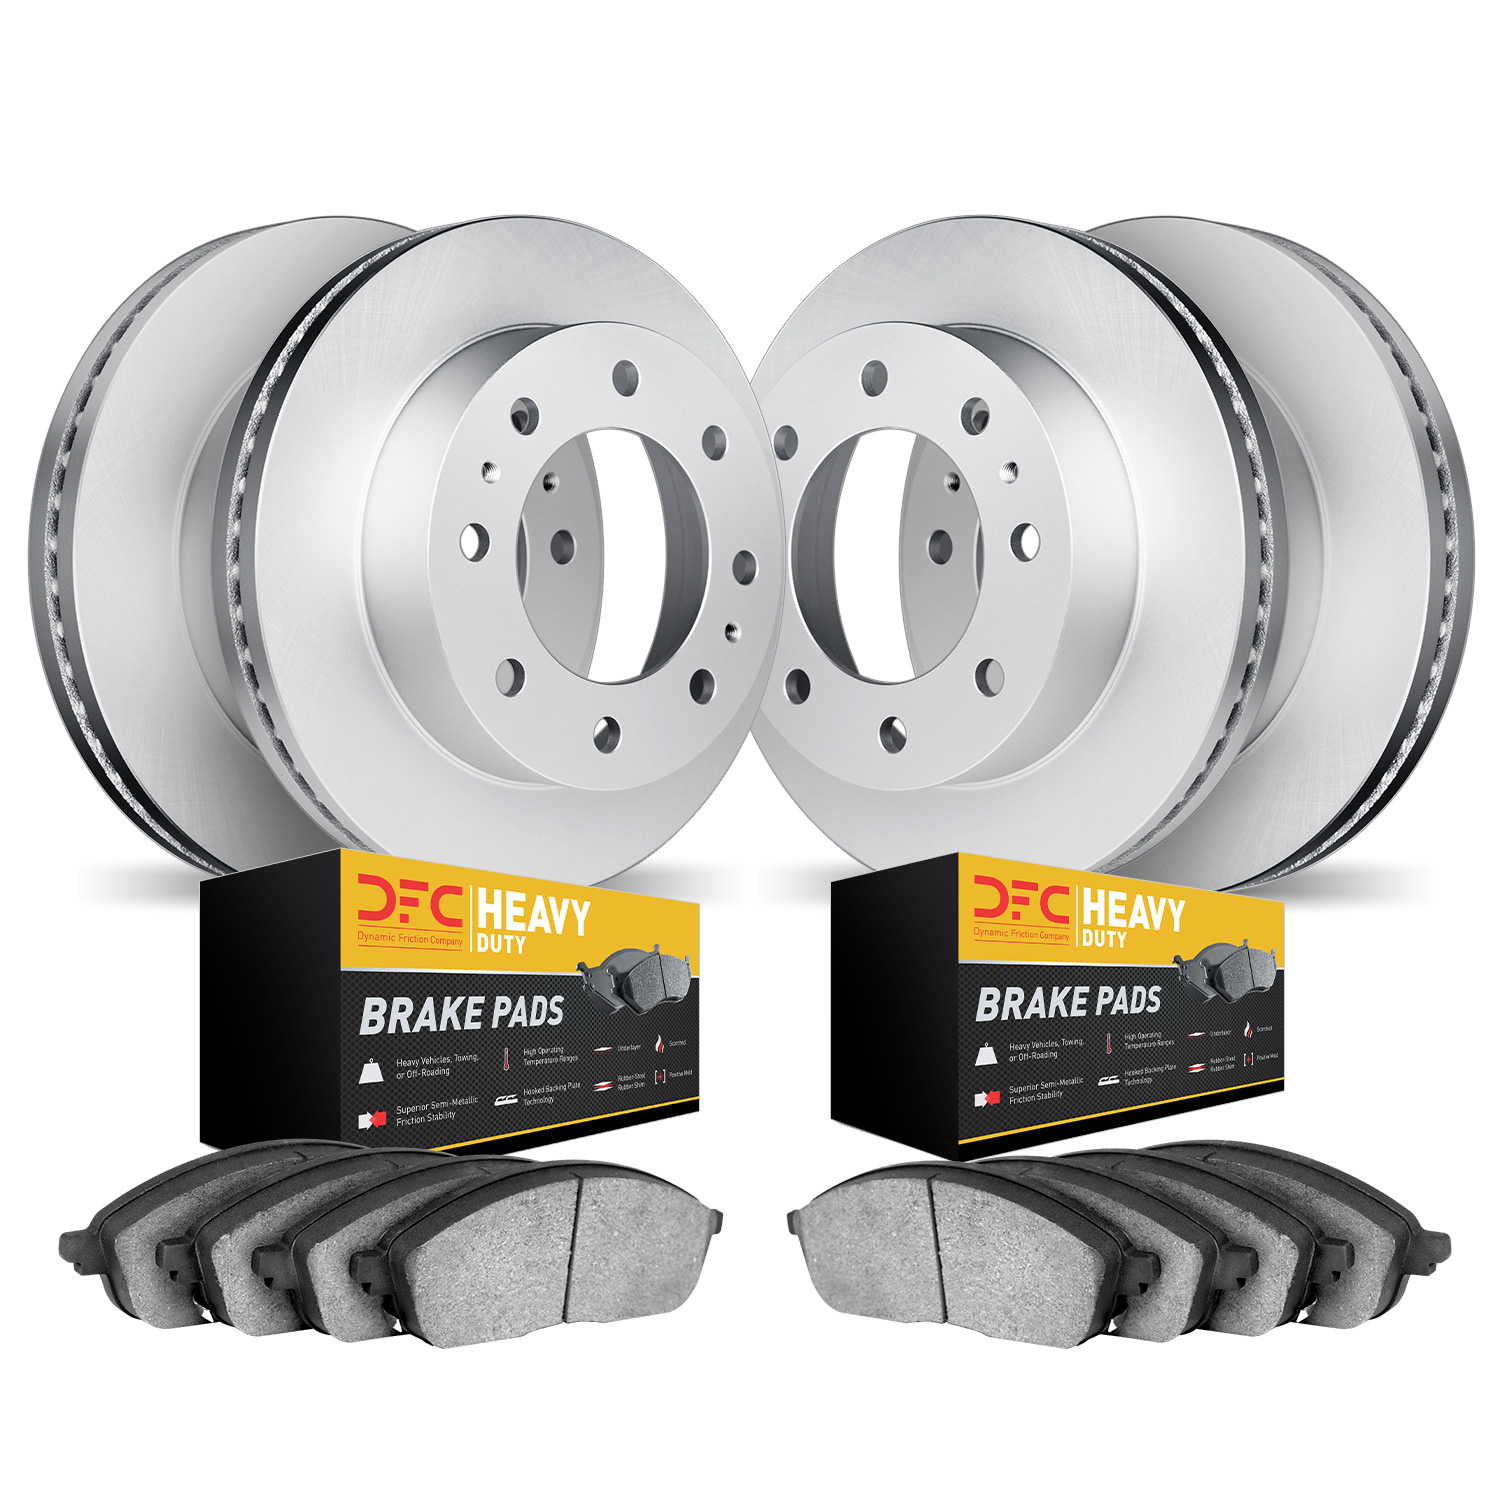 4204-54048 Geospec Brake Rotors w/Heavy-Duty Brake Pads Kit, 2006-2010 Ford/Lincoln/Mercury/Mazda, Position: Front and Rear